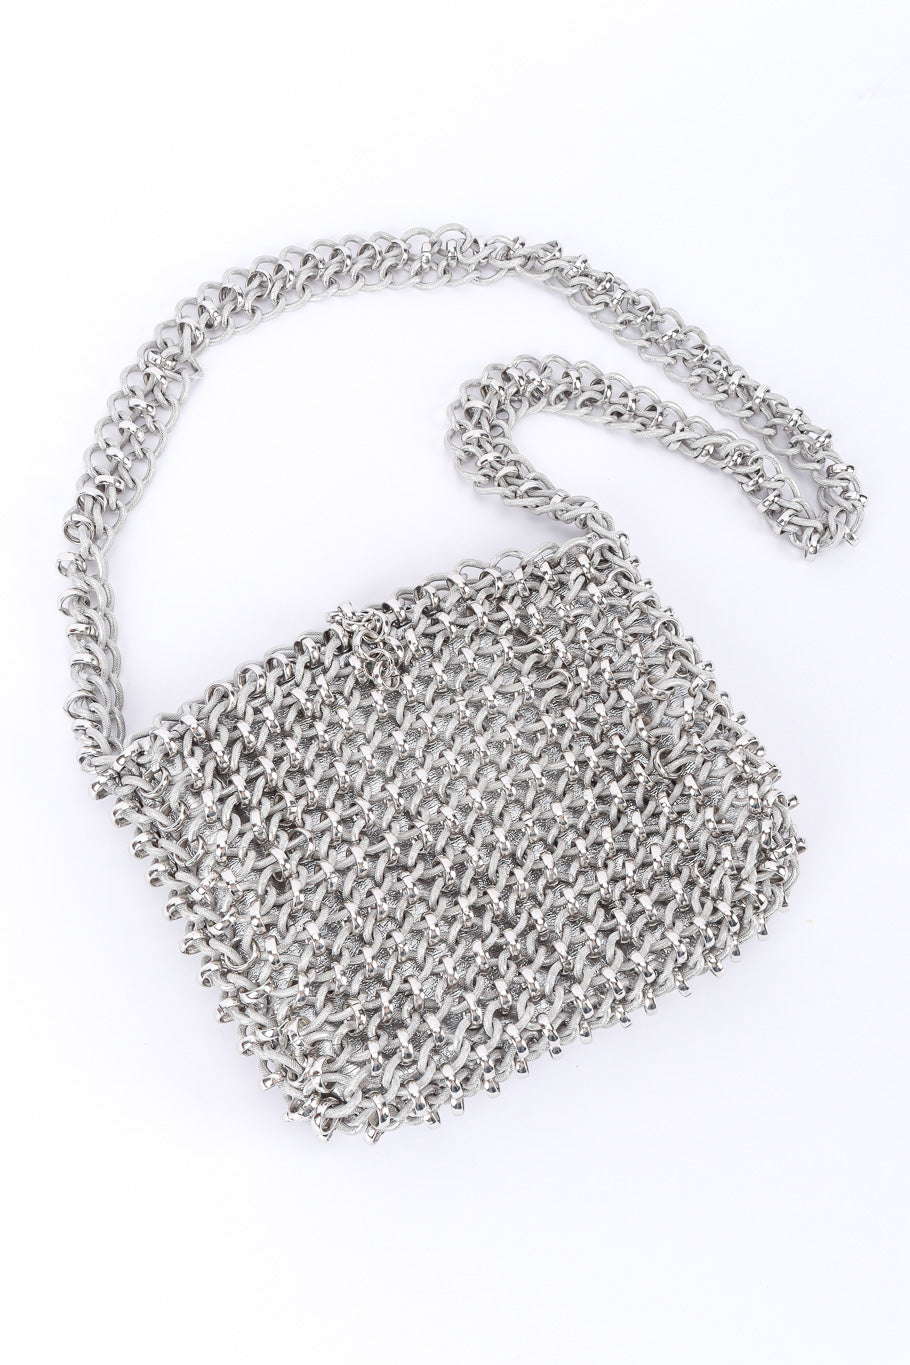 chainlink shoulder bag by Lewis flat lay on white background @recessla